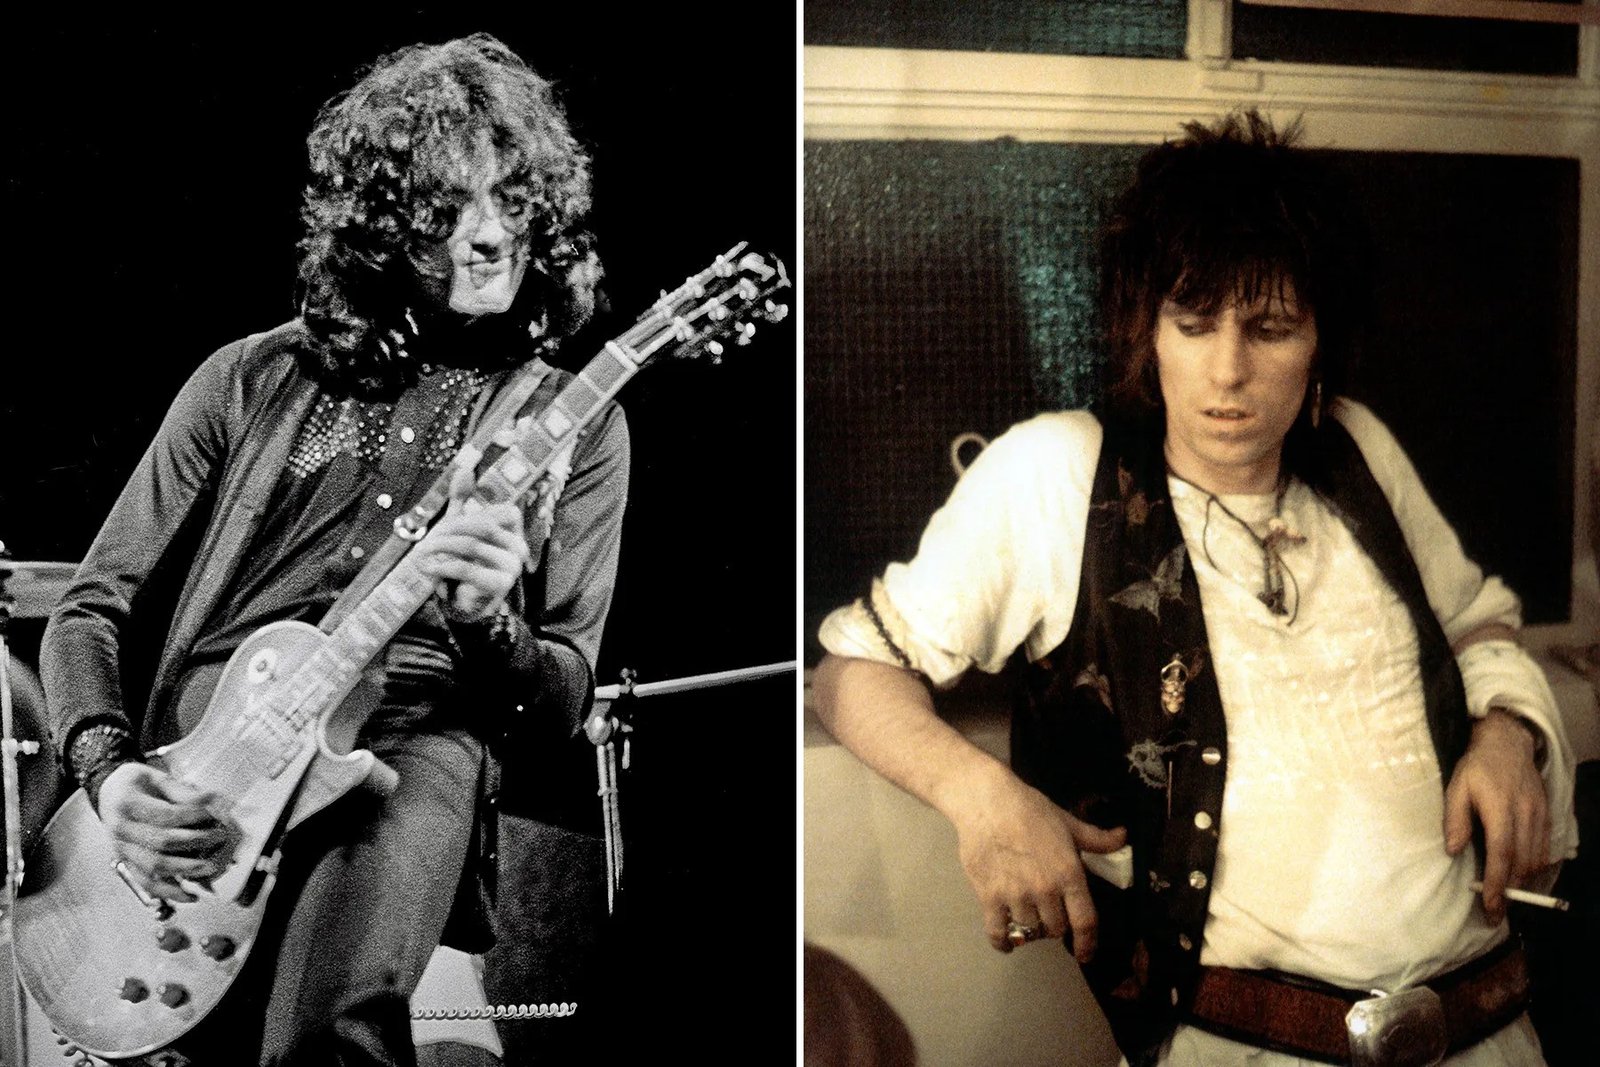 Jimmy page and keith richards